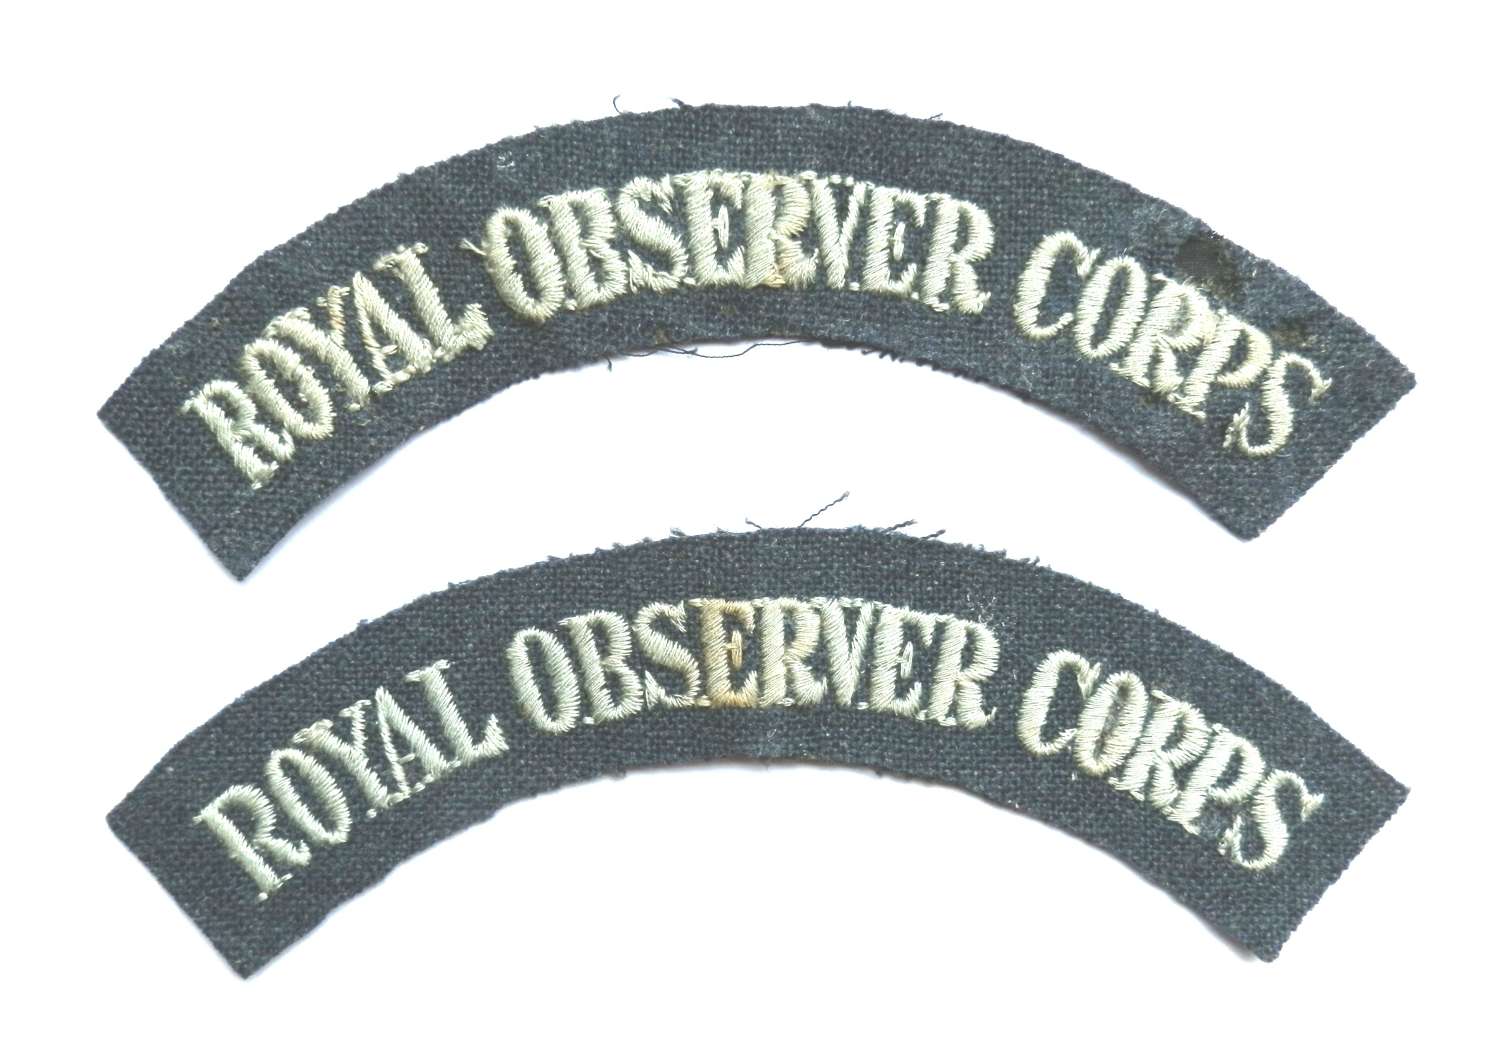 Pair of Royal Observer Corps Cloth Shoulder Titles.